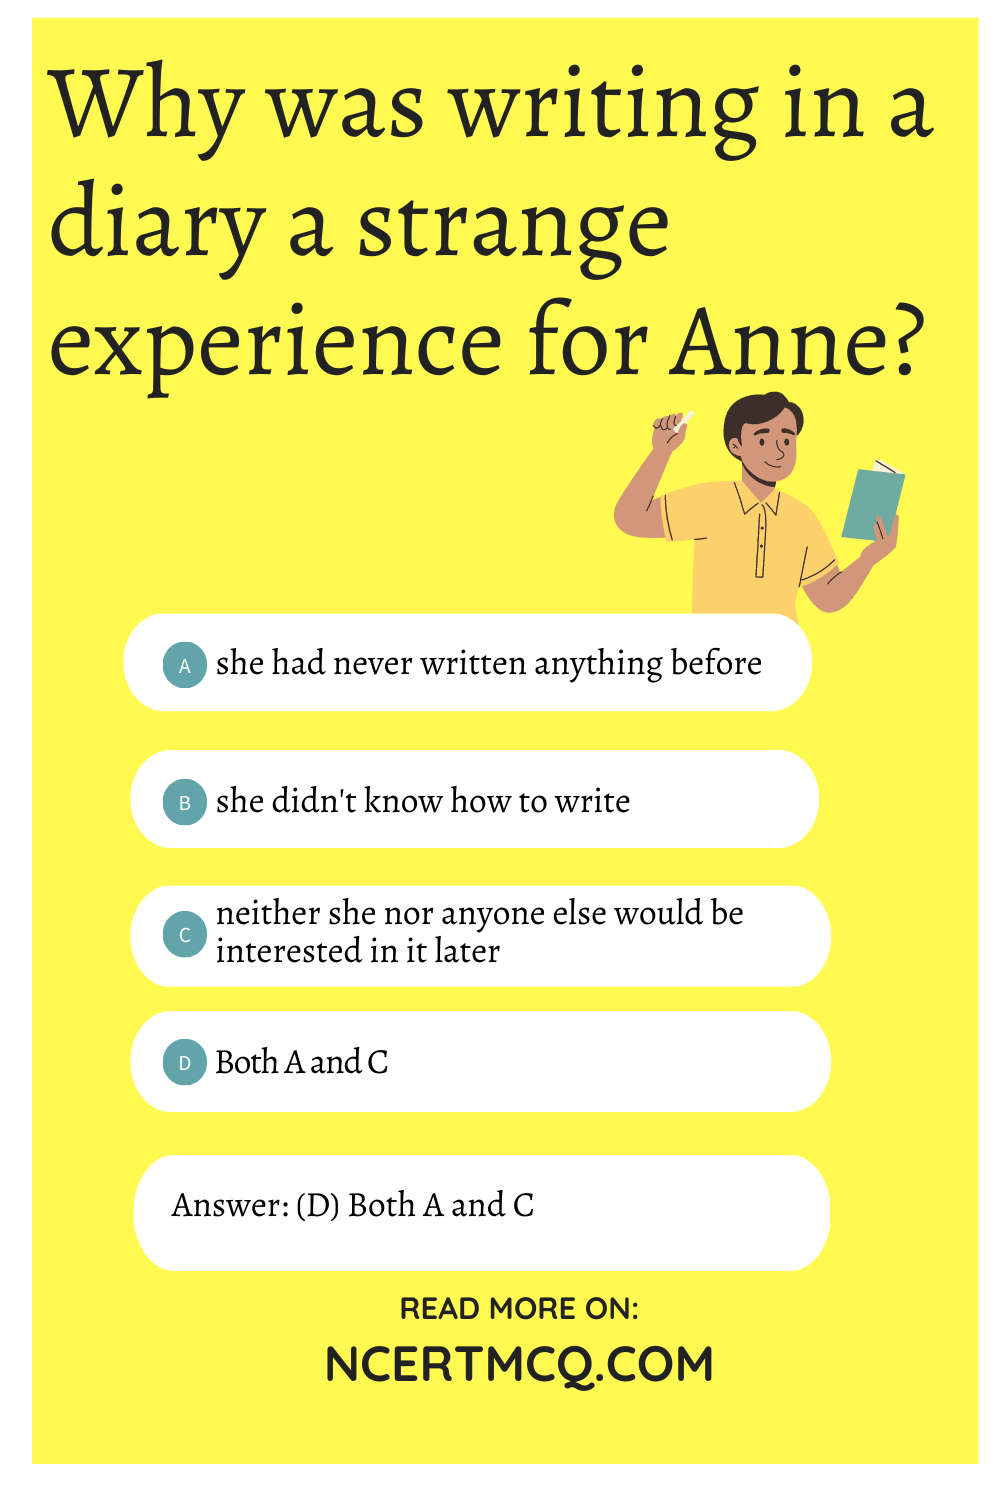 Why was writing in a diary a strange experience for Anne?